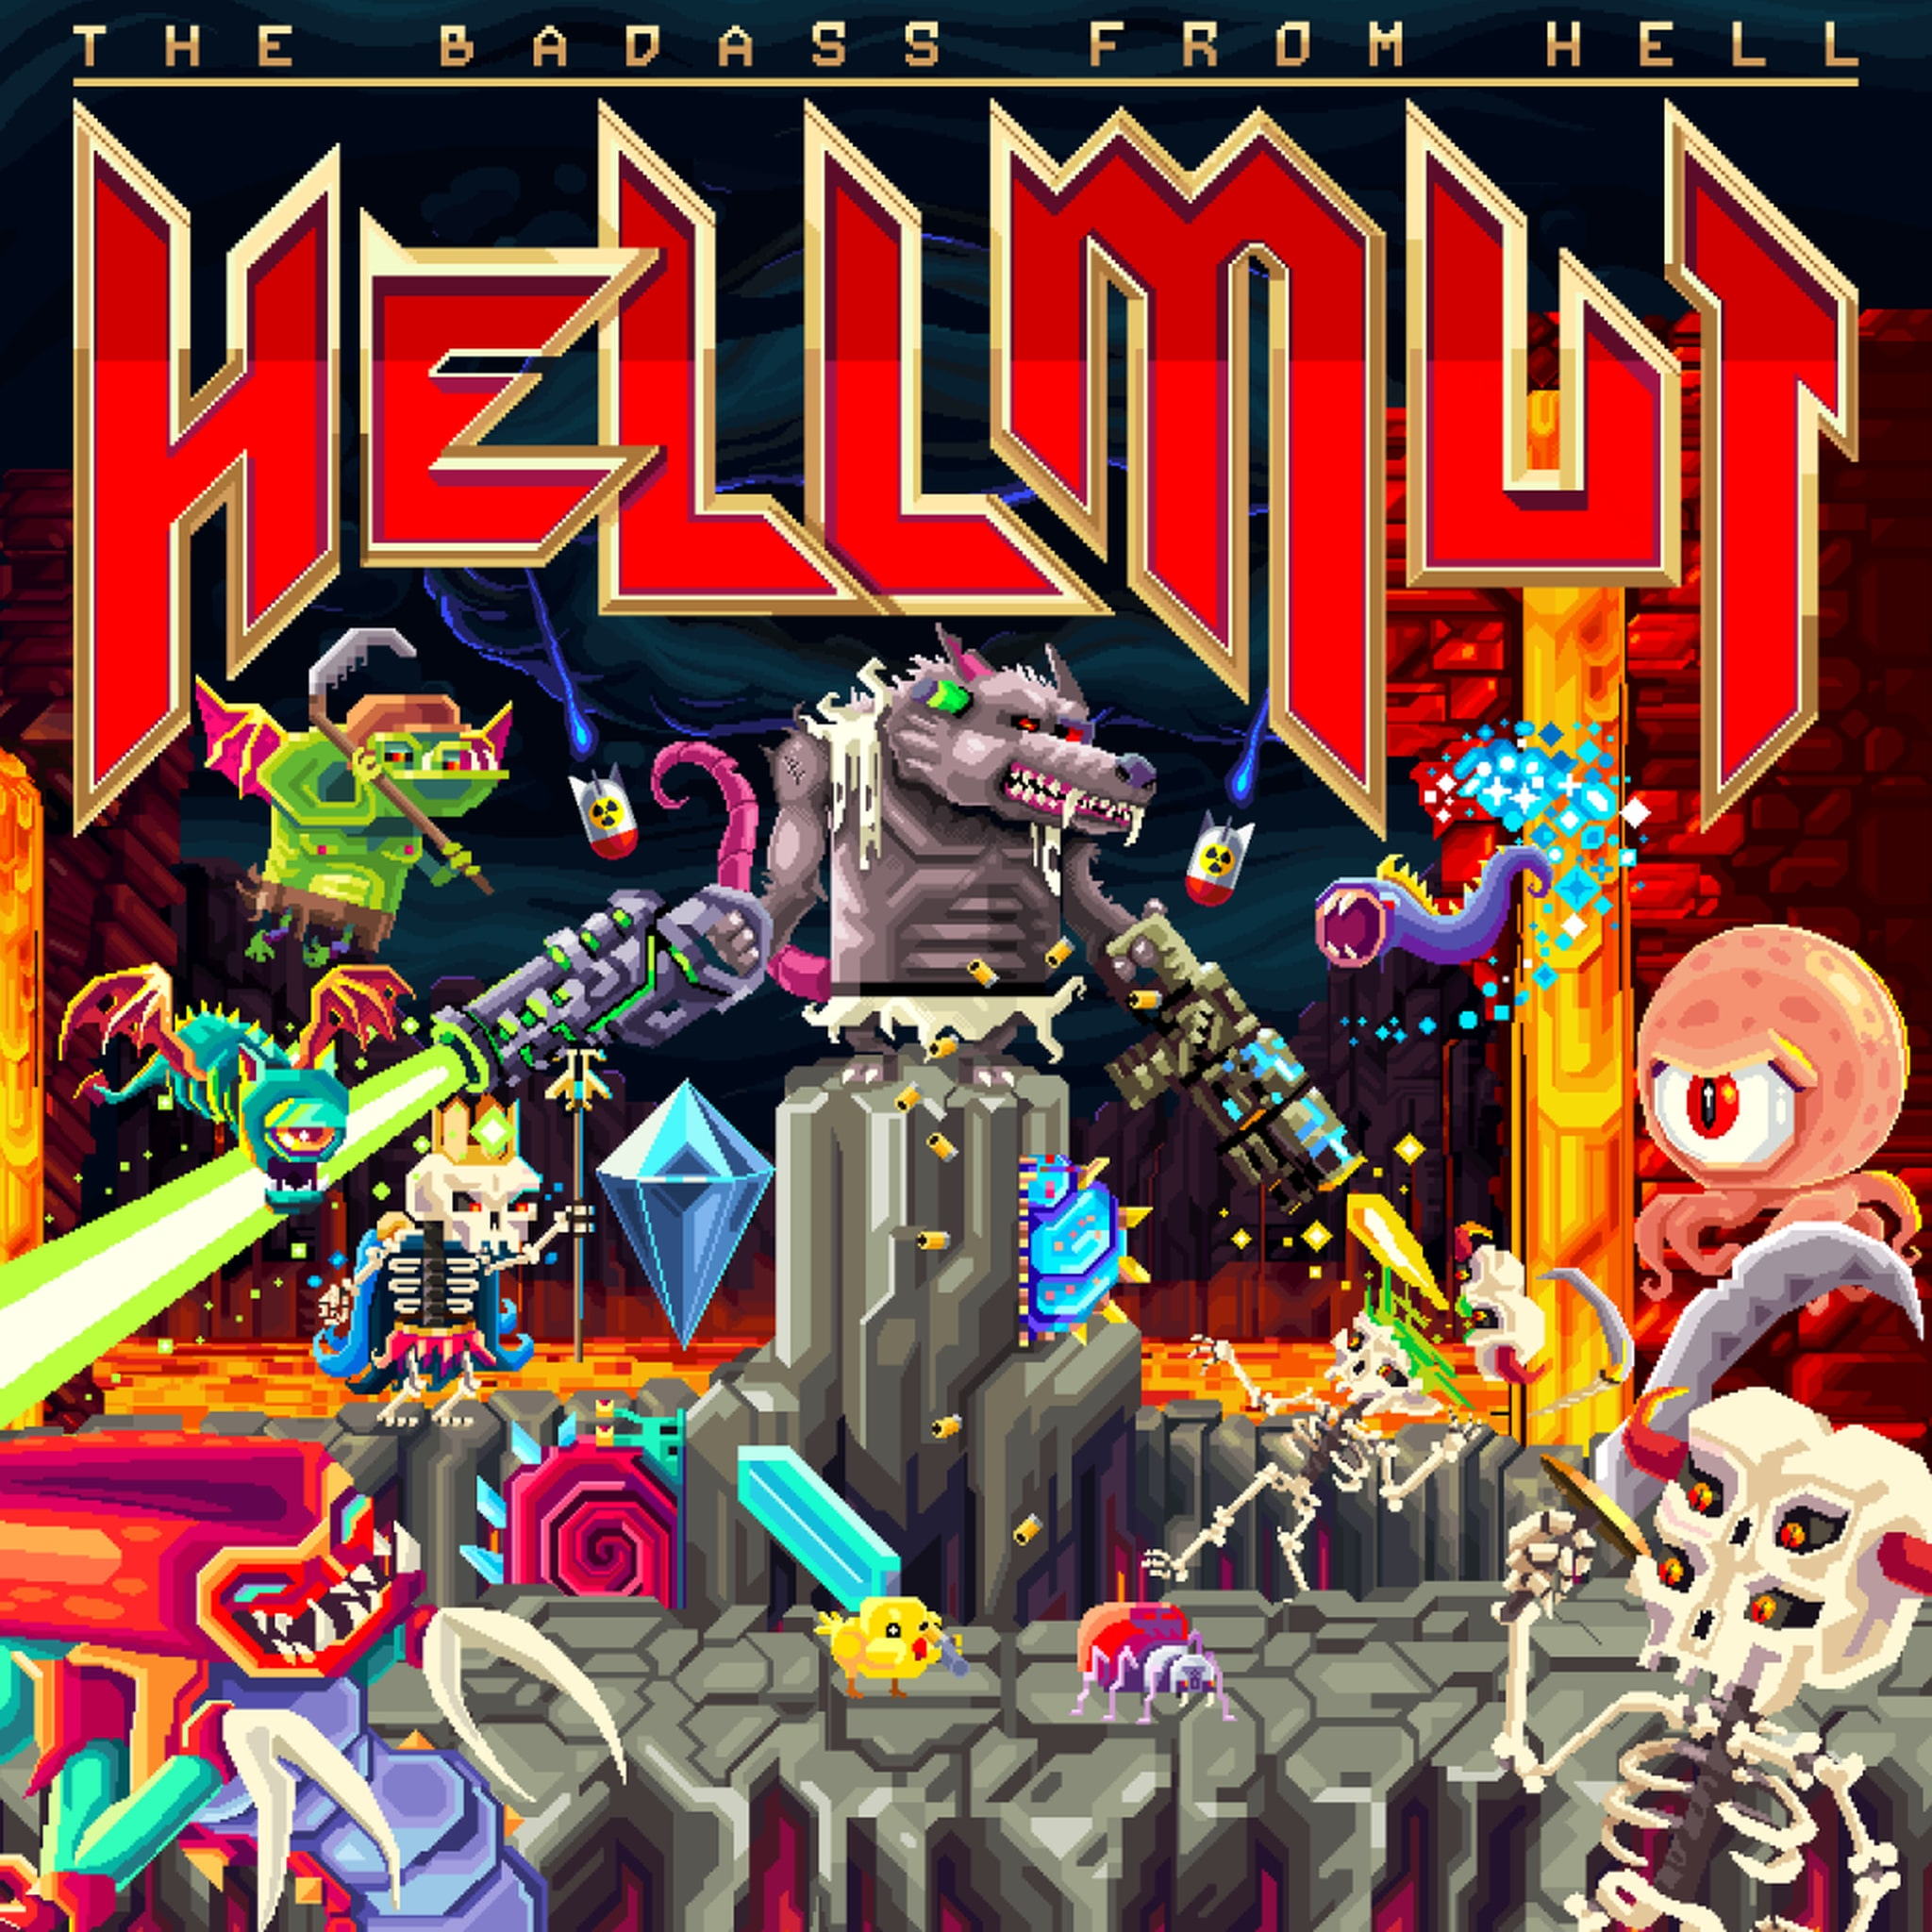 Digital hell kinitopet. Игра для Nintendo Switch Hellmut: the Badass from Hell. Helmut the Badass from Hell Gameplay. Wailing heights. Board game about Hell.